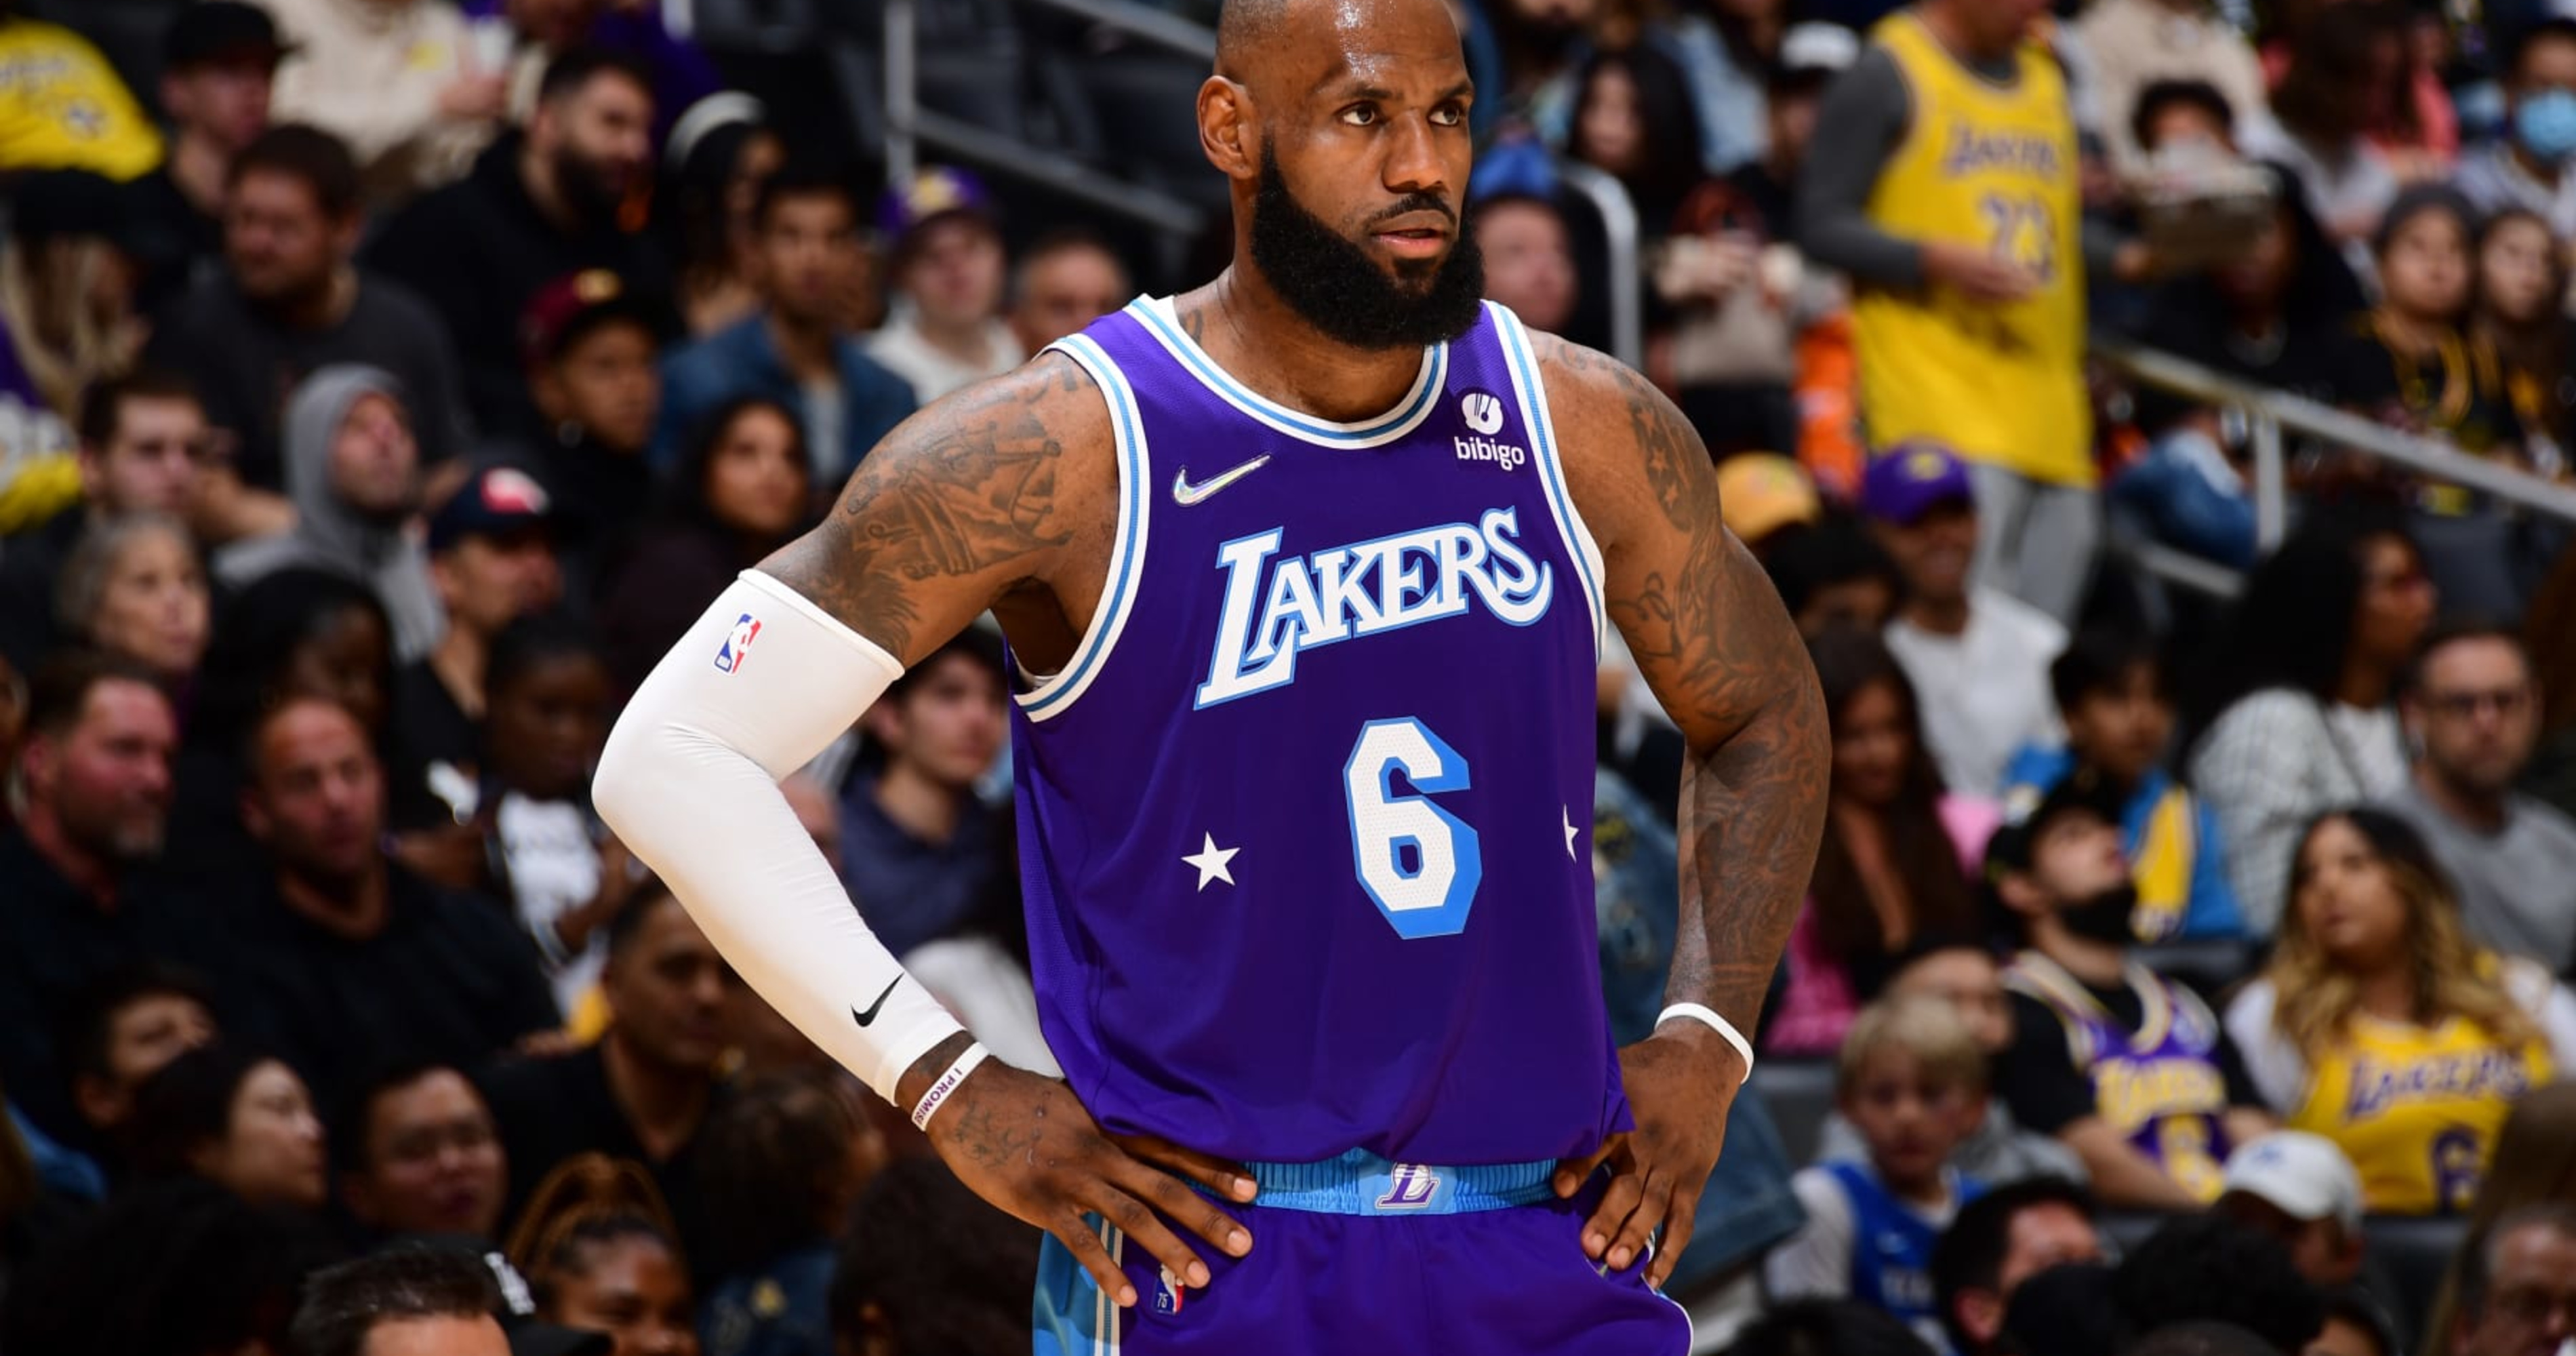 LeBron James Rumors: Chance to Play with Son Bronny Only Reason He